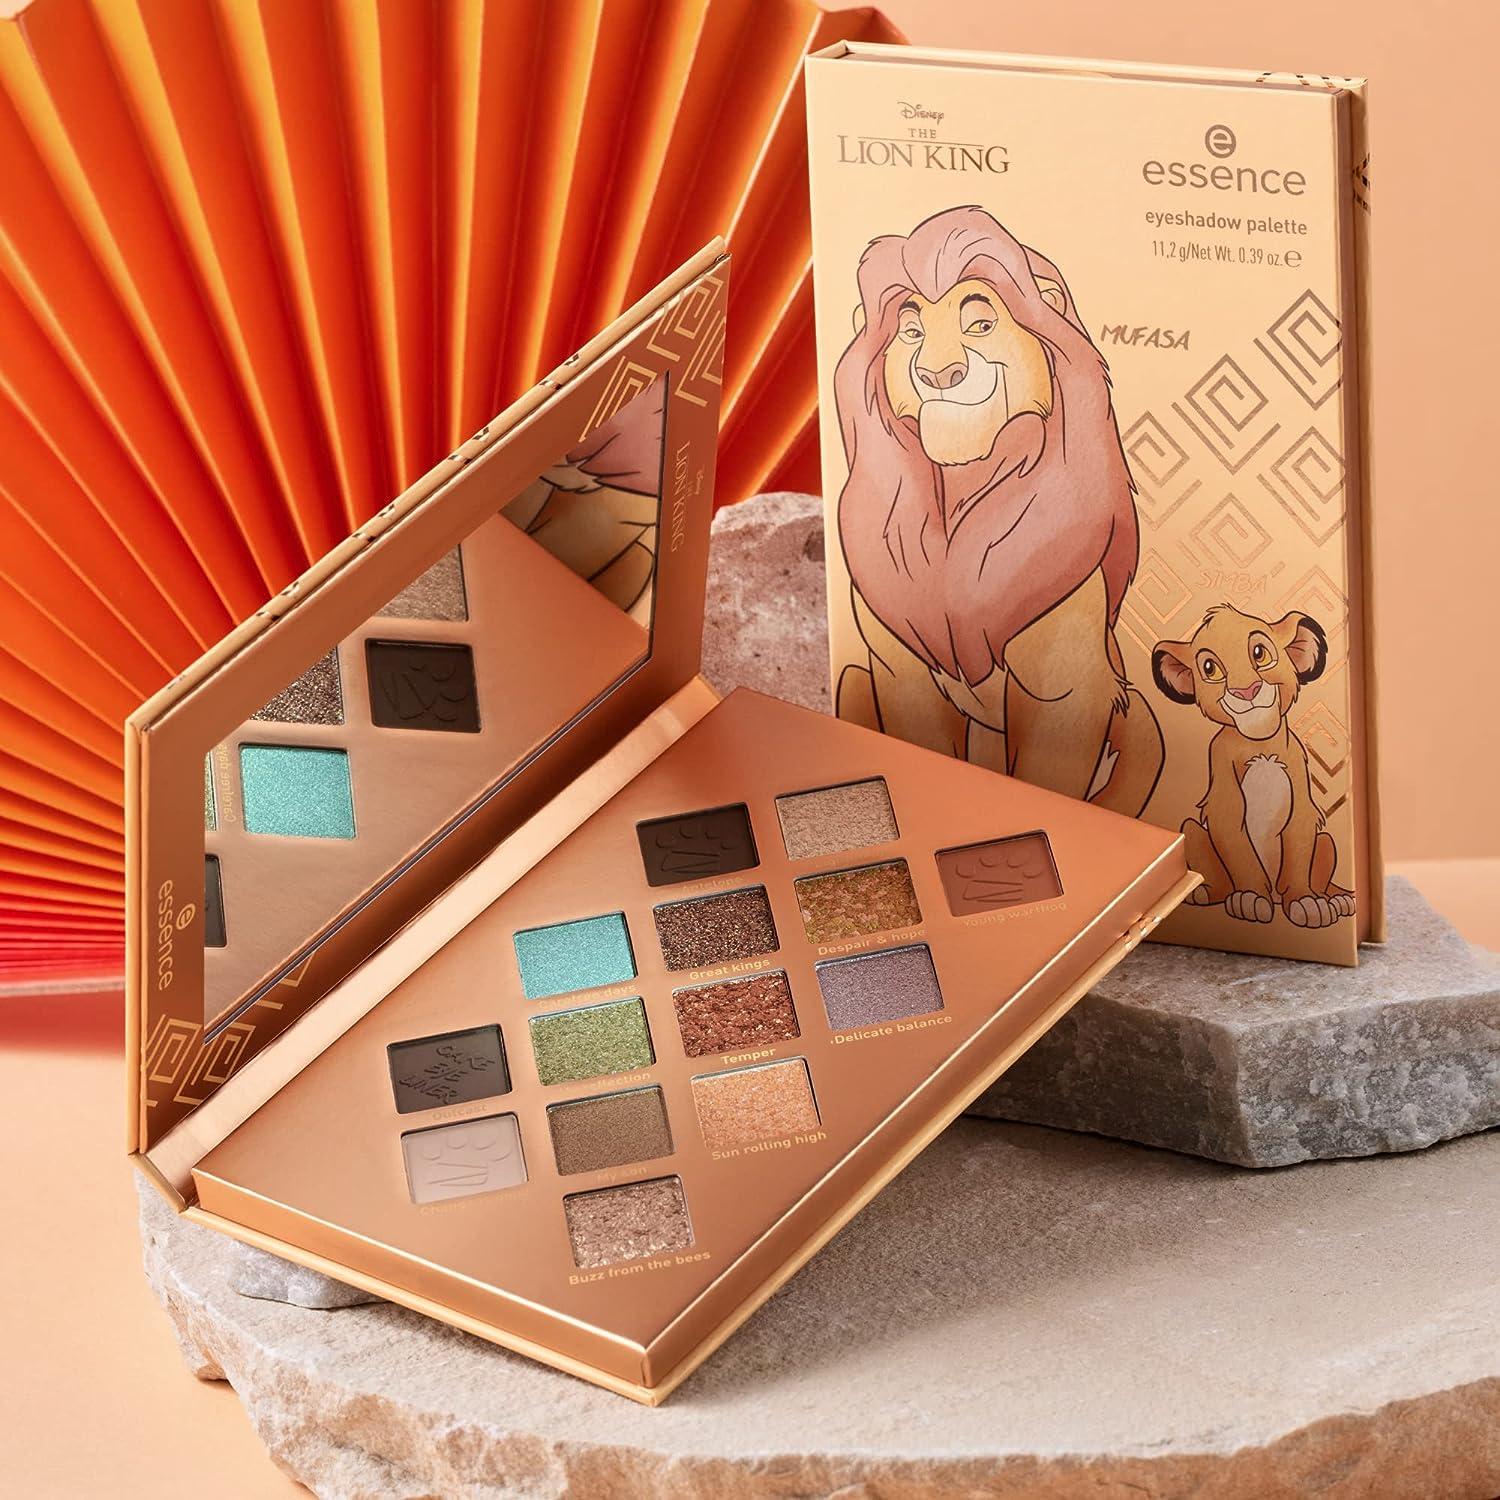 essence | The Lion Paraben | Metallic Matte | & Vegan & Disney Free Eyeshadow Collection Cruelty to Edition | Palette Pigmented Limited 14 King Easy Blend | Shadows | Oil Highly